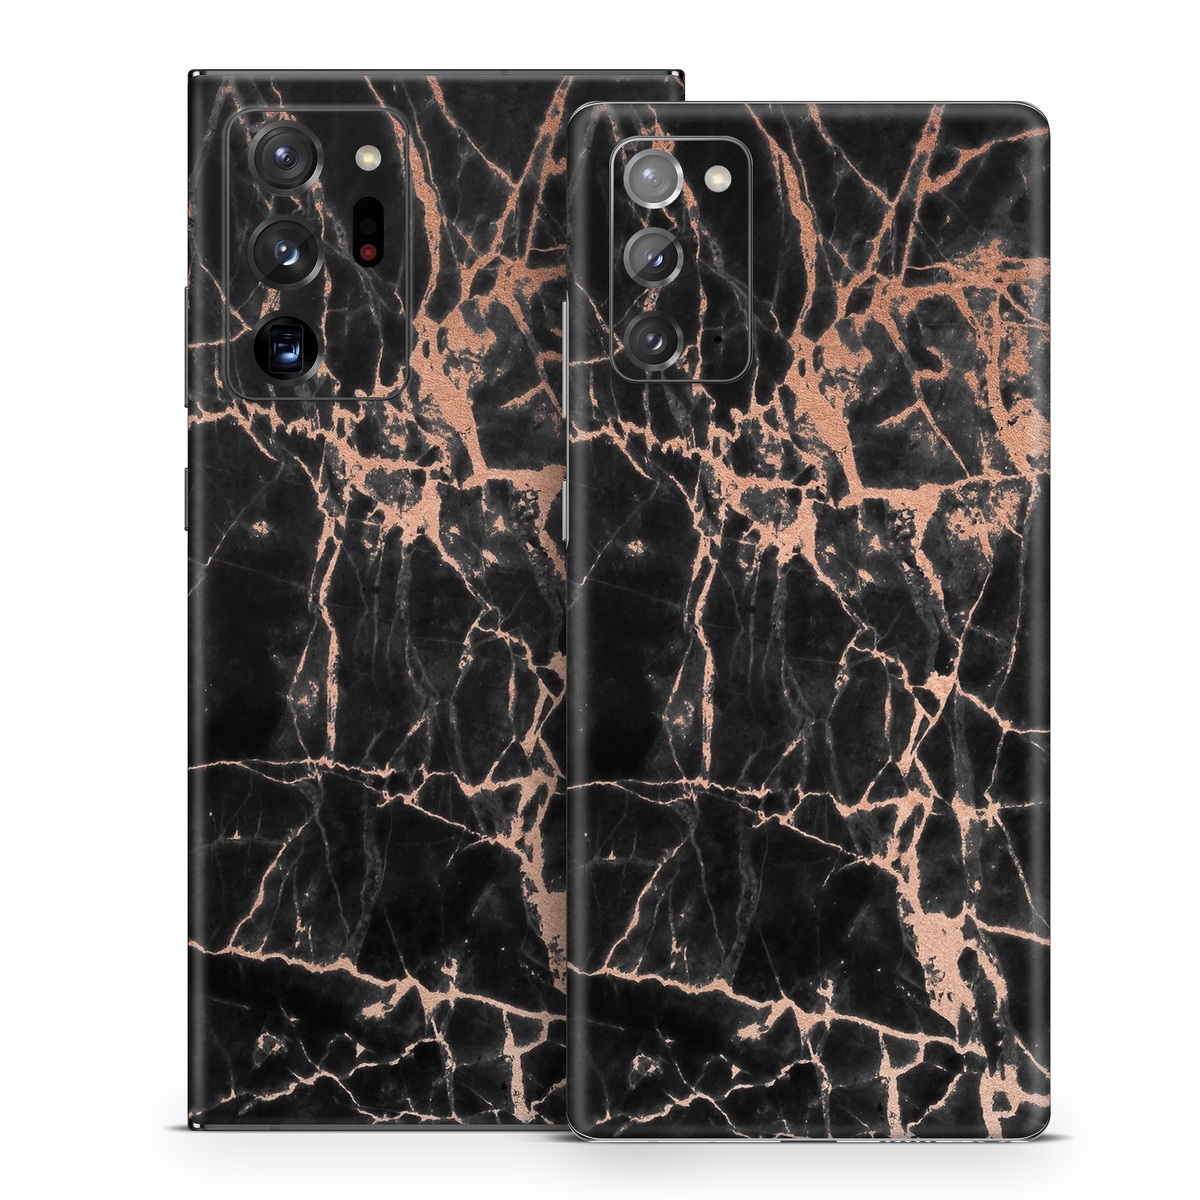 Samsung Galaxy Note 20 Series Skin design of Branch, Black, Twig, Tree, Brown, Sky, Atmosphere, Plant, Winter, Night, with black, pink colors